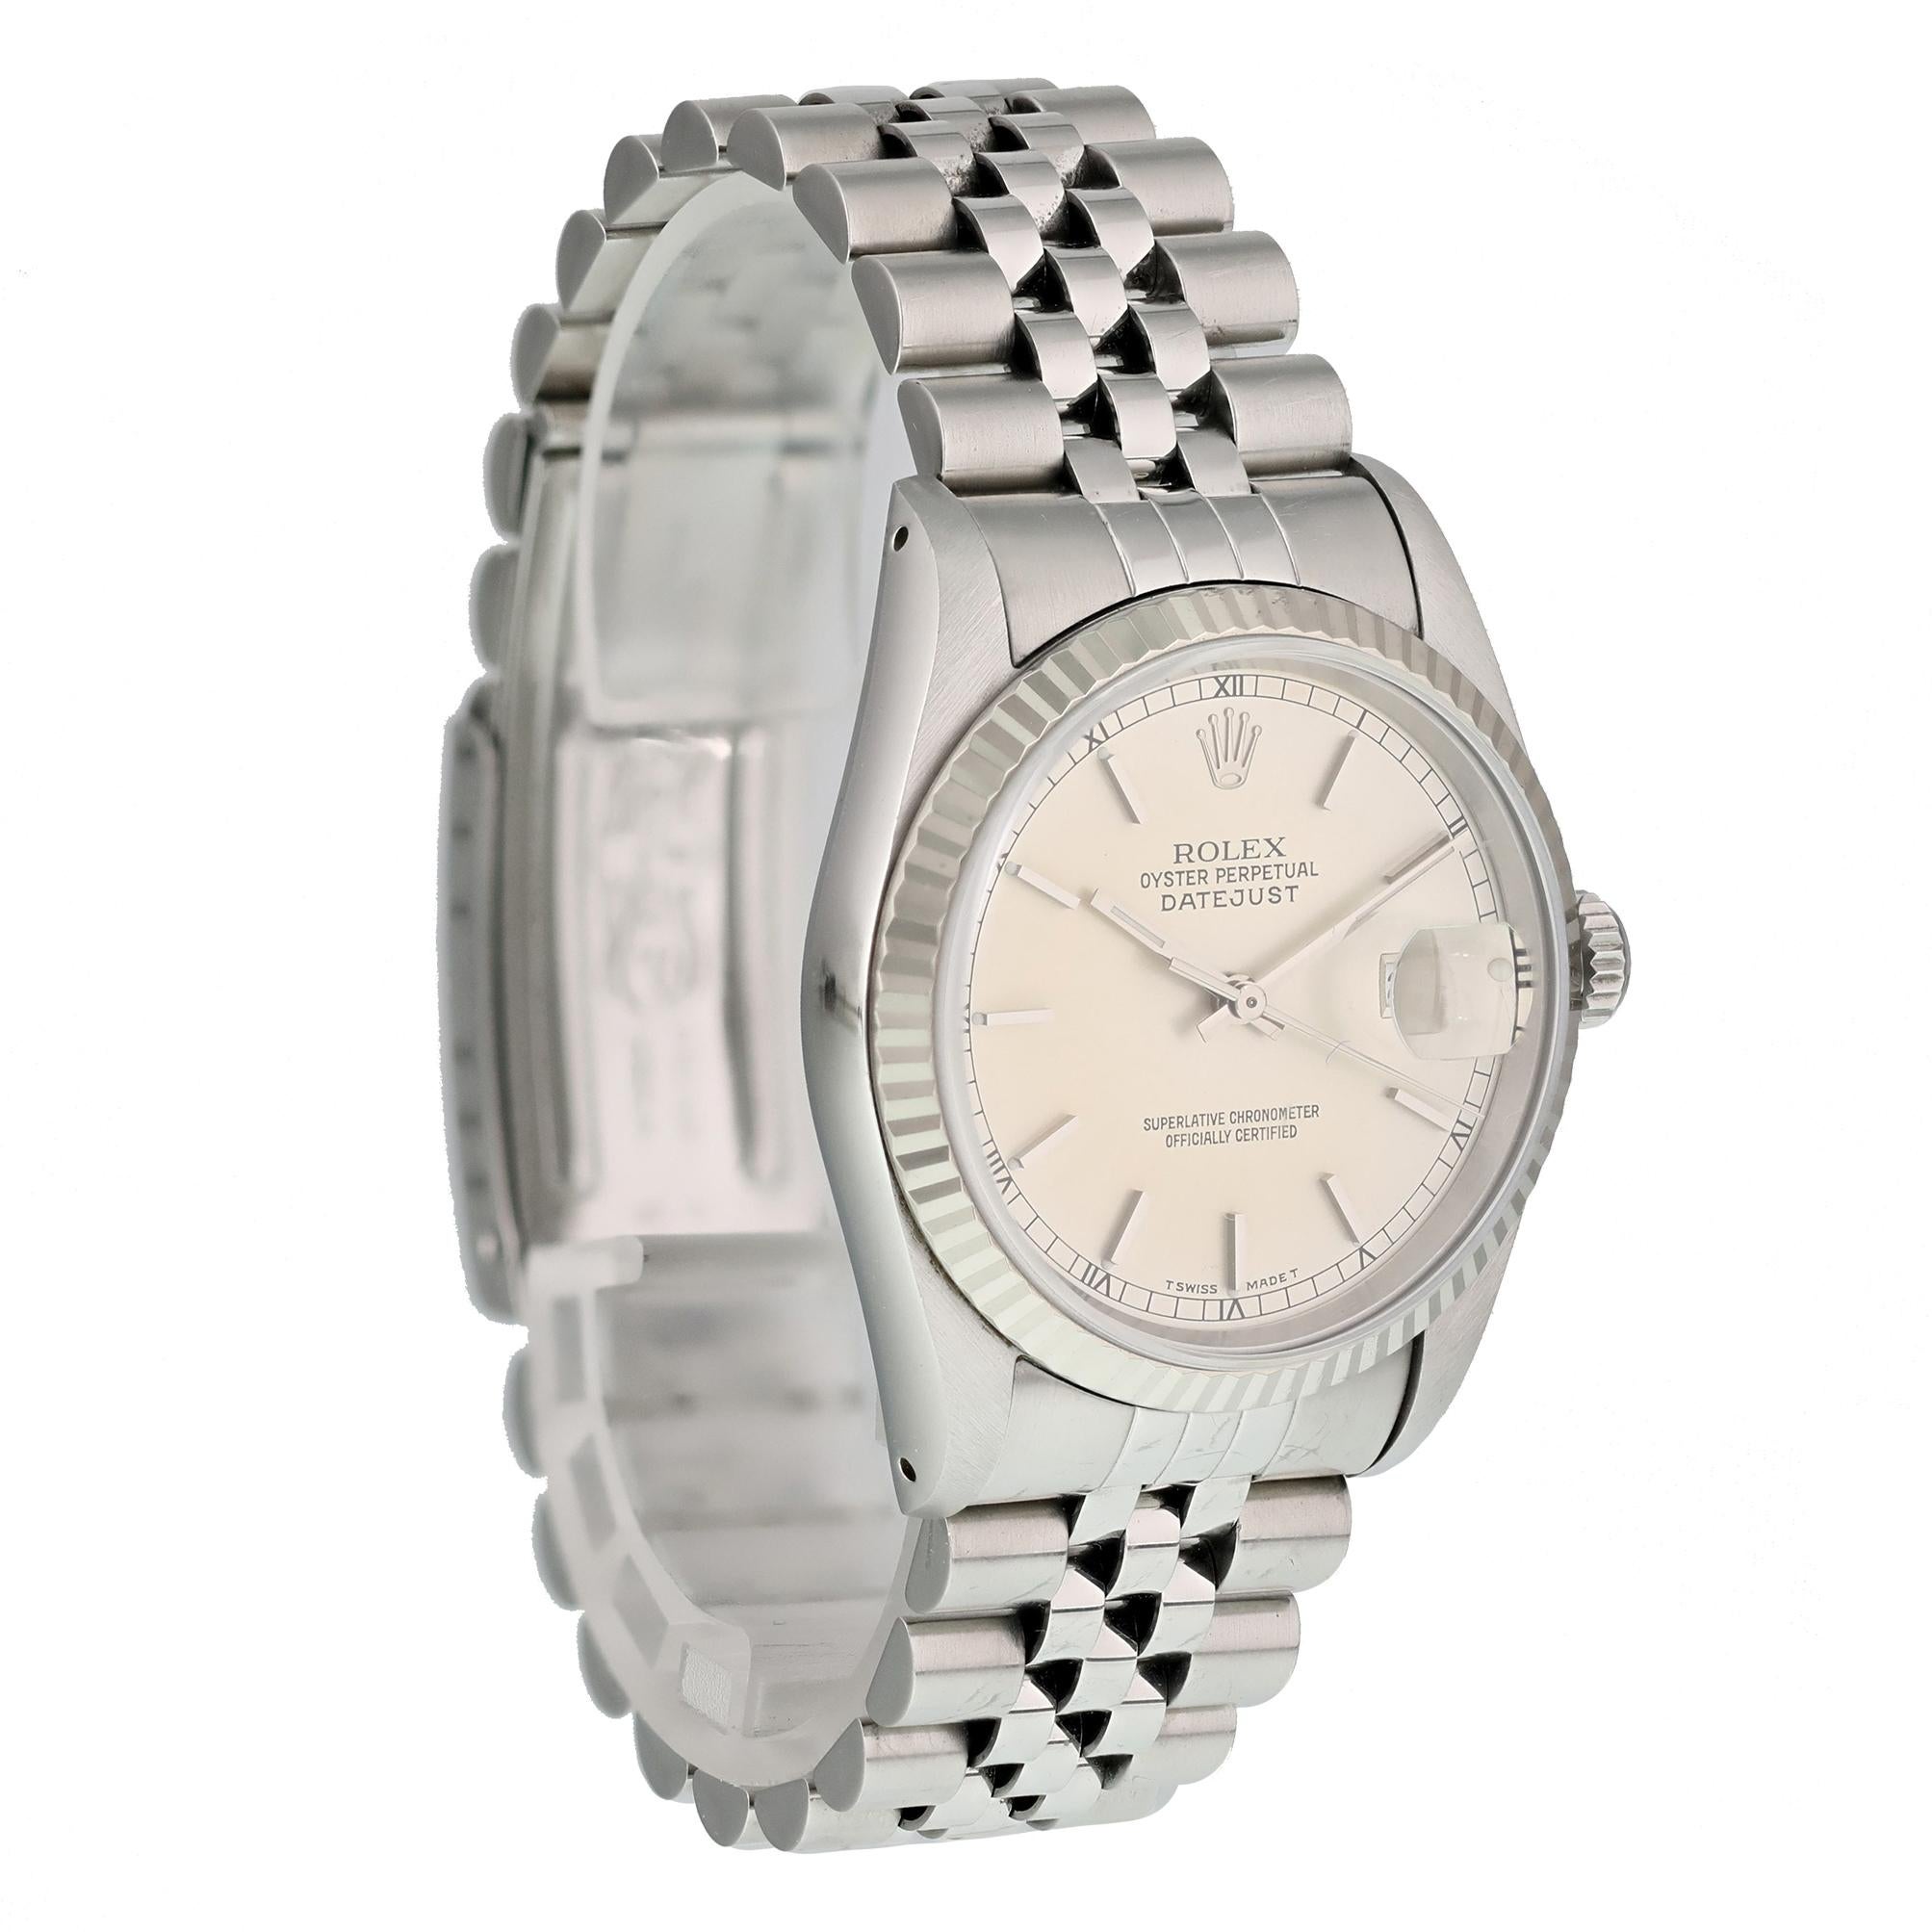 Rolex Oyster Perpetual Datejust 16014 Men's Watch In Excellent Condition For Sale In New York, NY